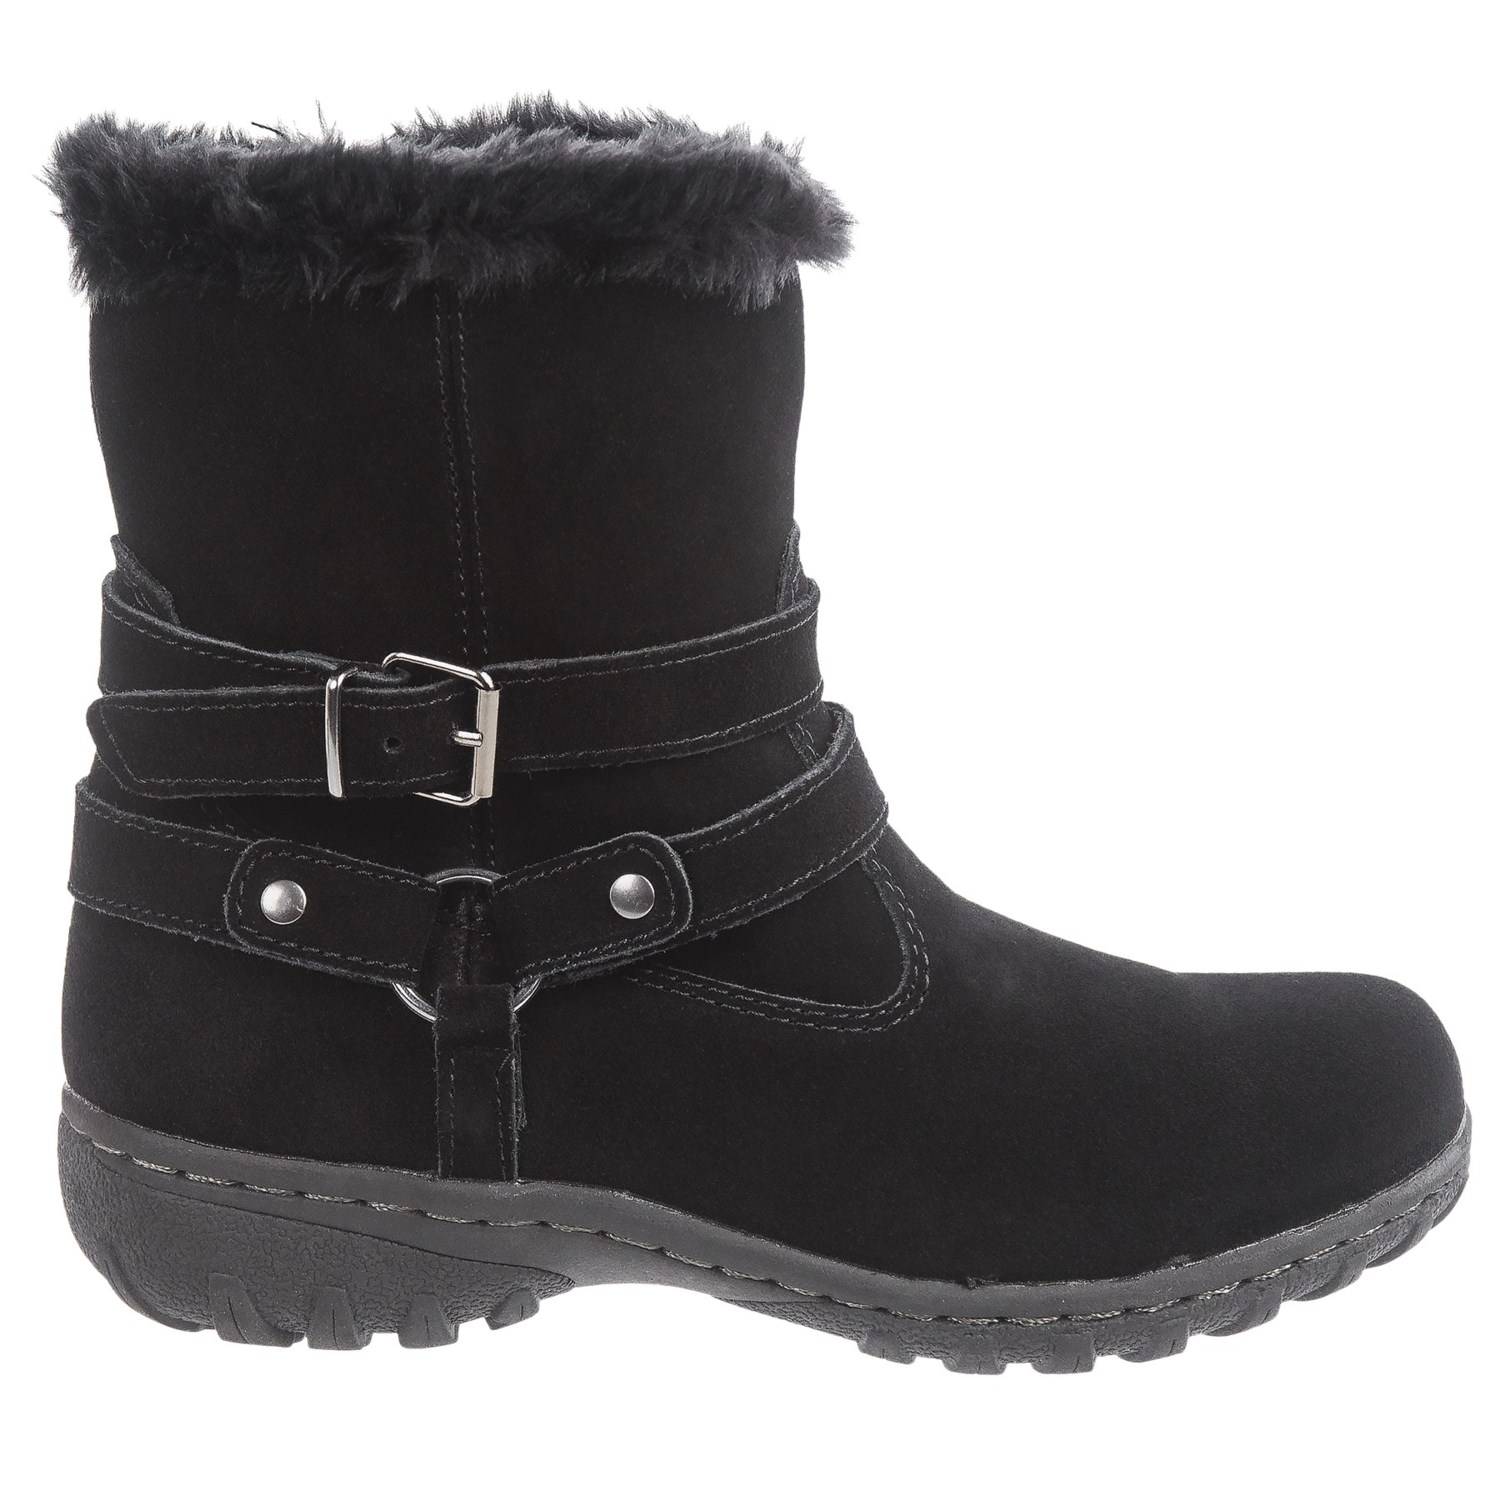 Khombu Kelly Snow Boots (For Women) - Save 60%